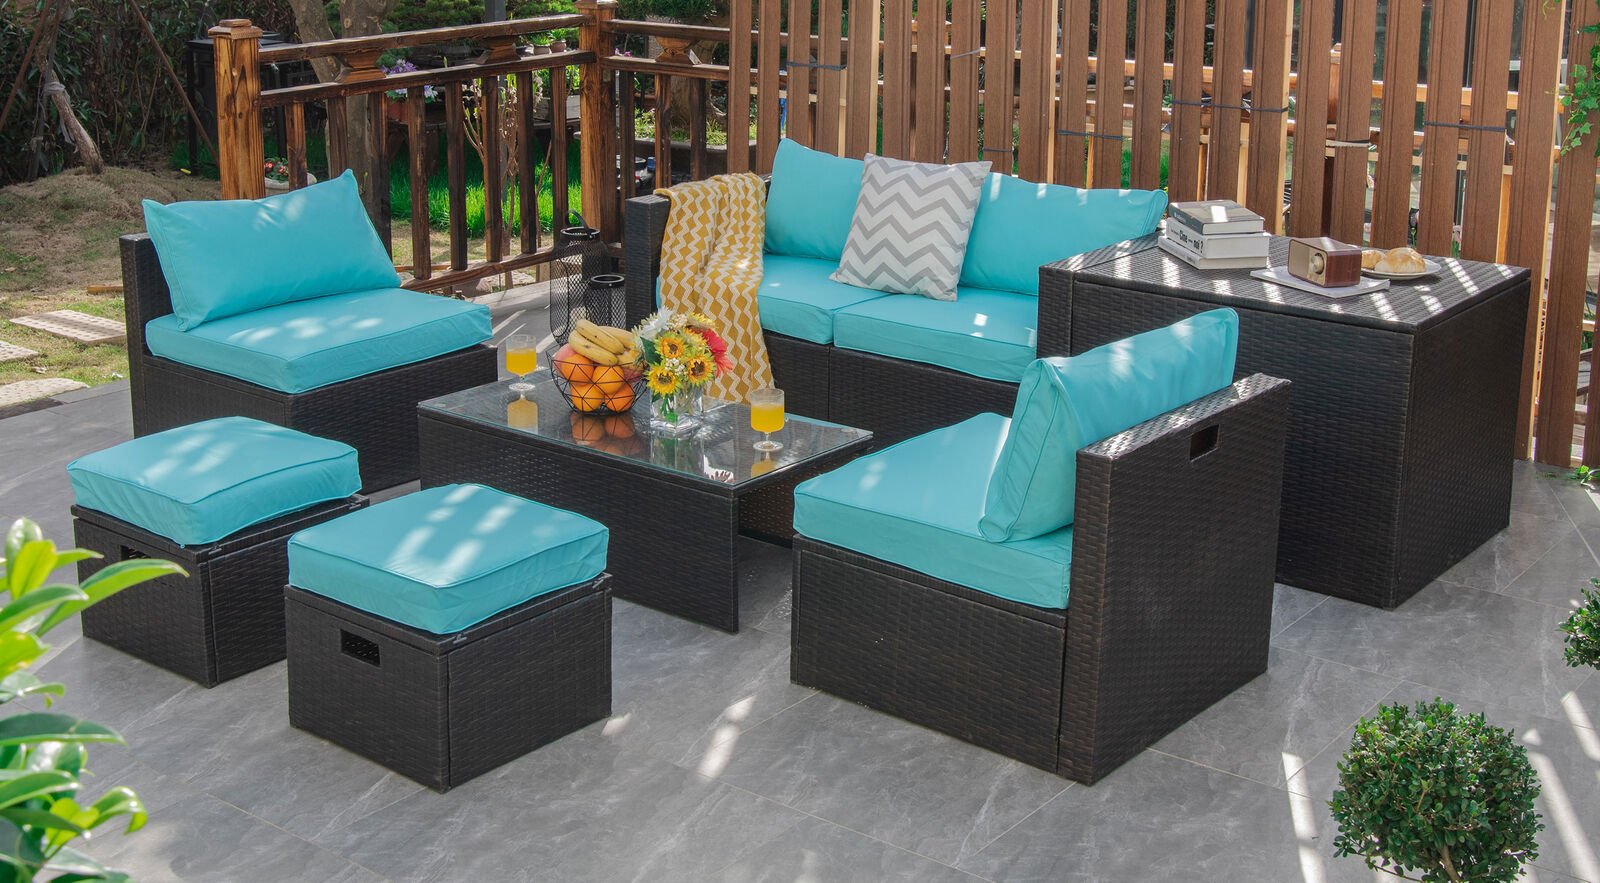 8 Pieces Patio Space-Saving Rattan Furniture Set with Storage Box and Waterproof Cover, Turquoise - Gallery Canada